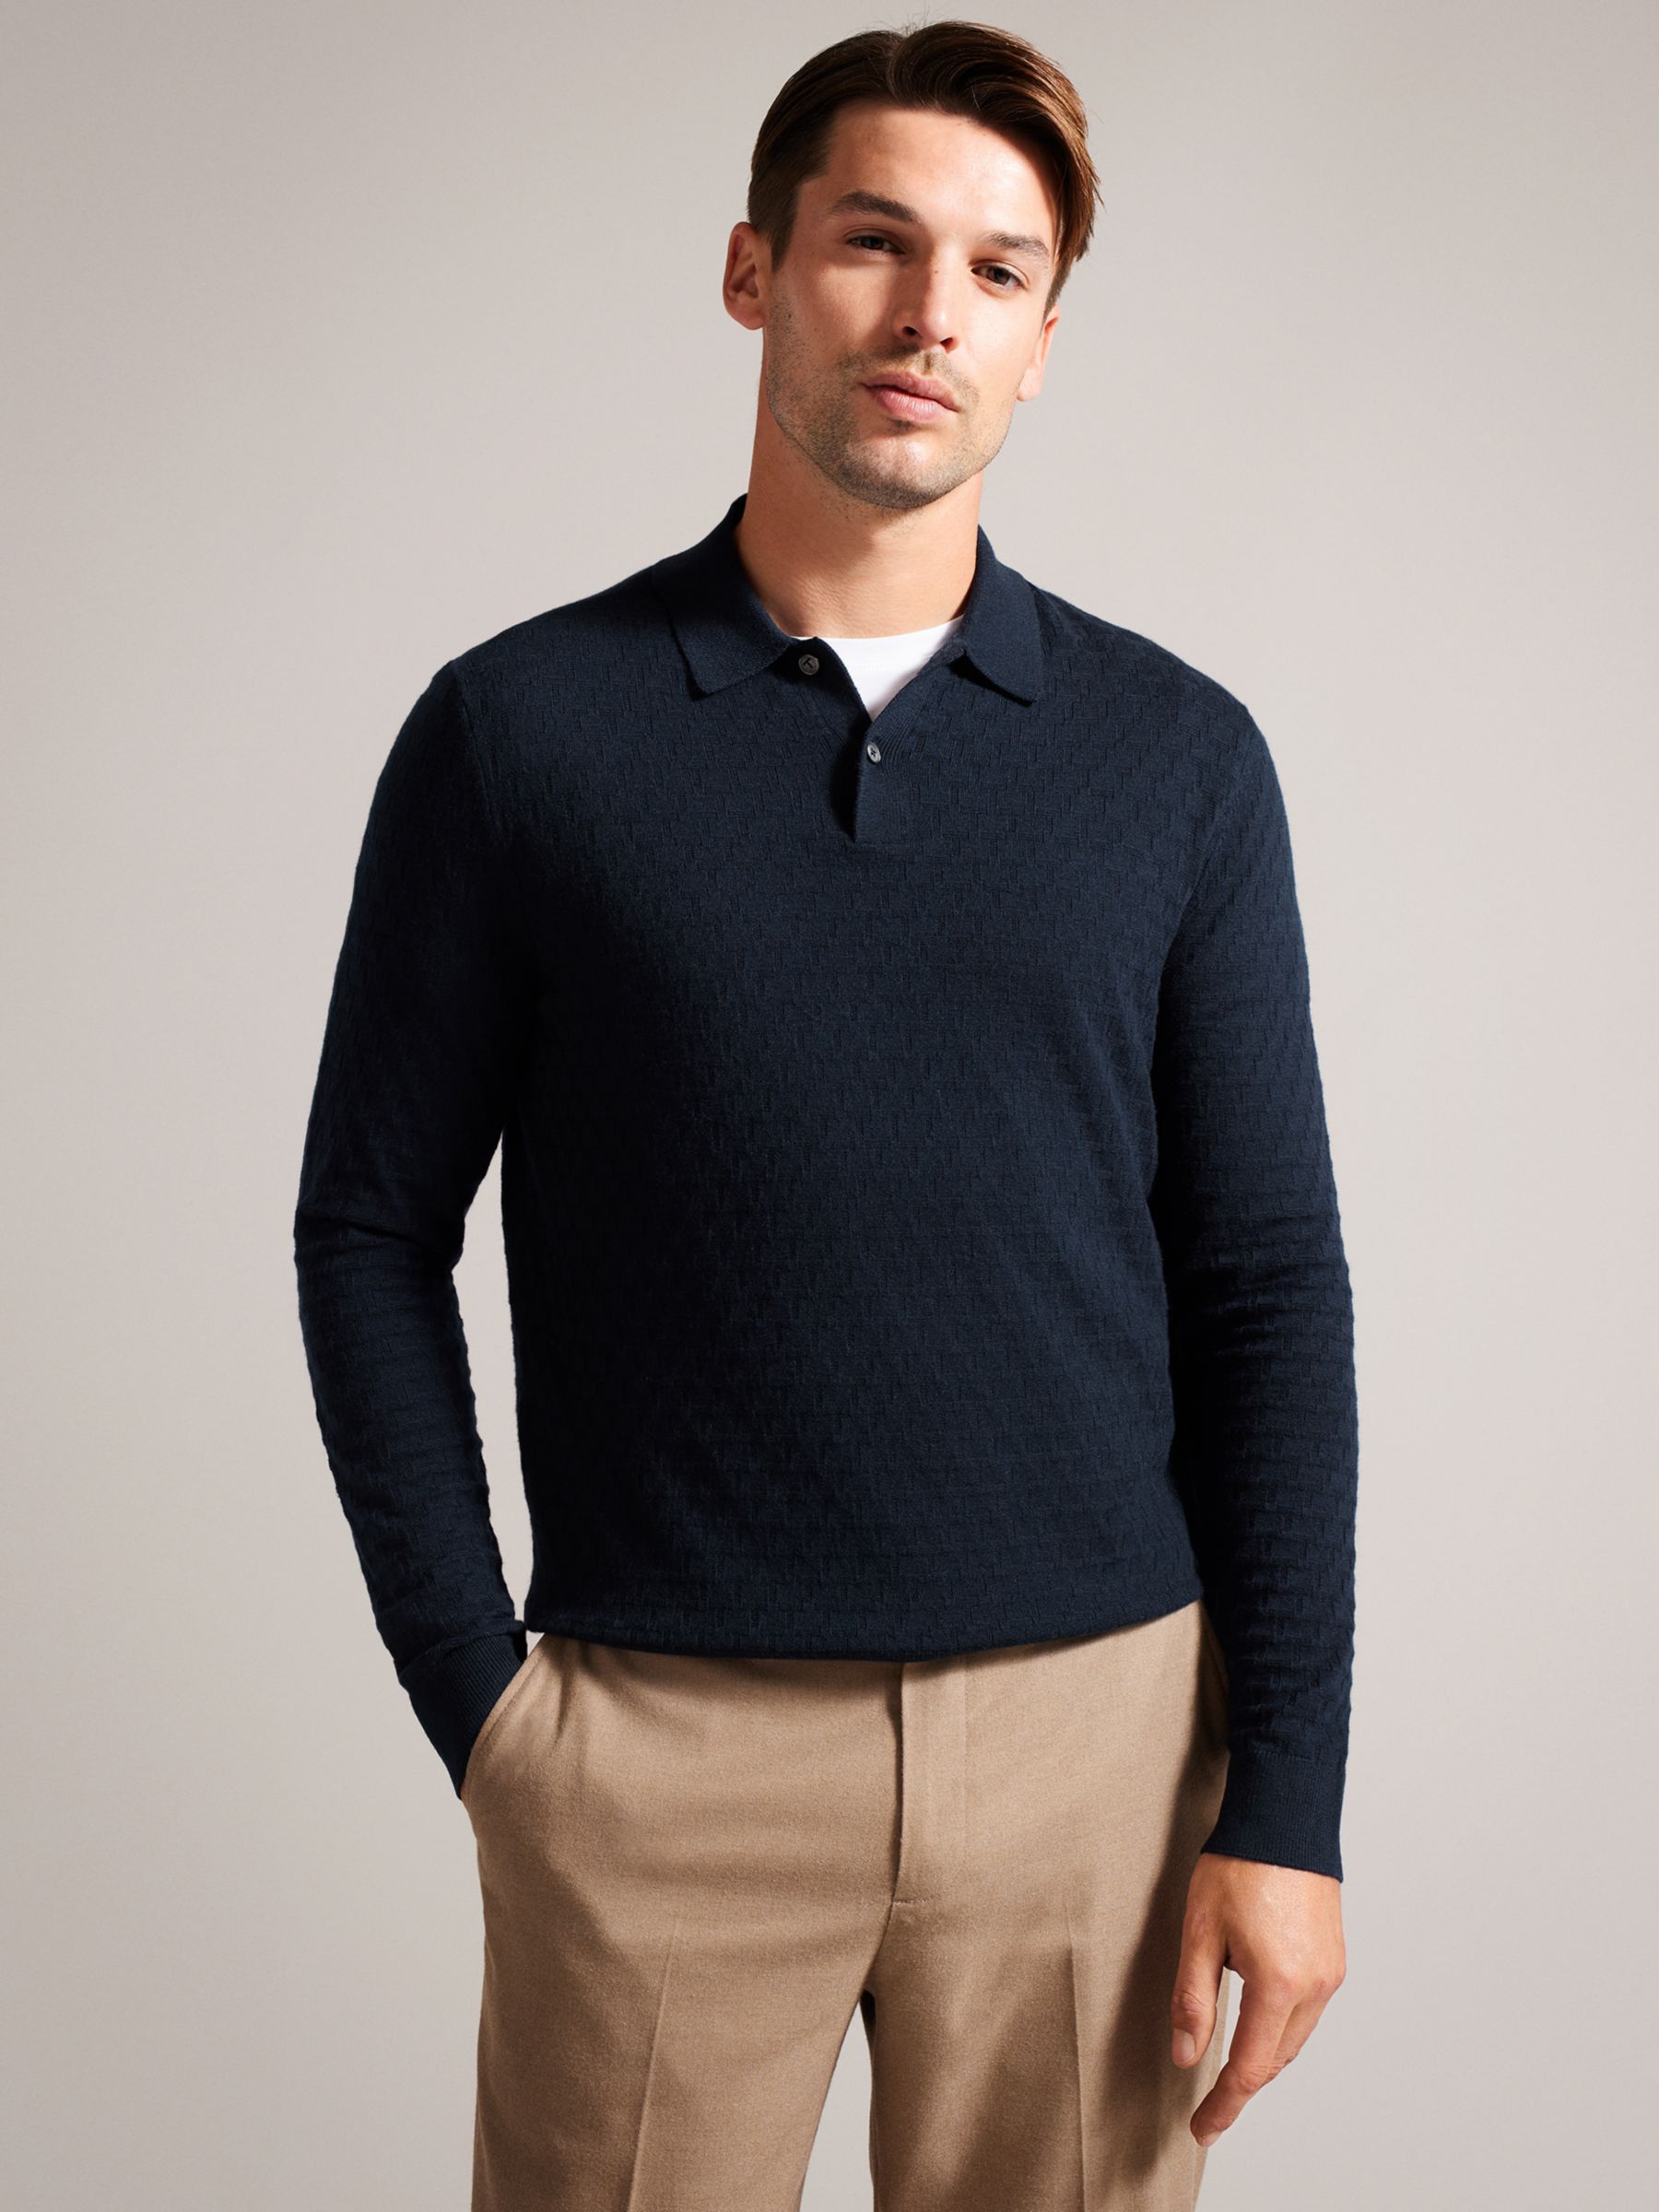 Ted Baker Morar Knitted Polo Top, Blue Navy, L